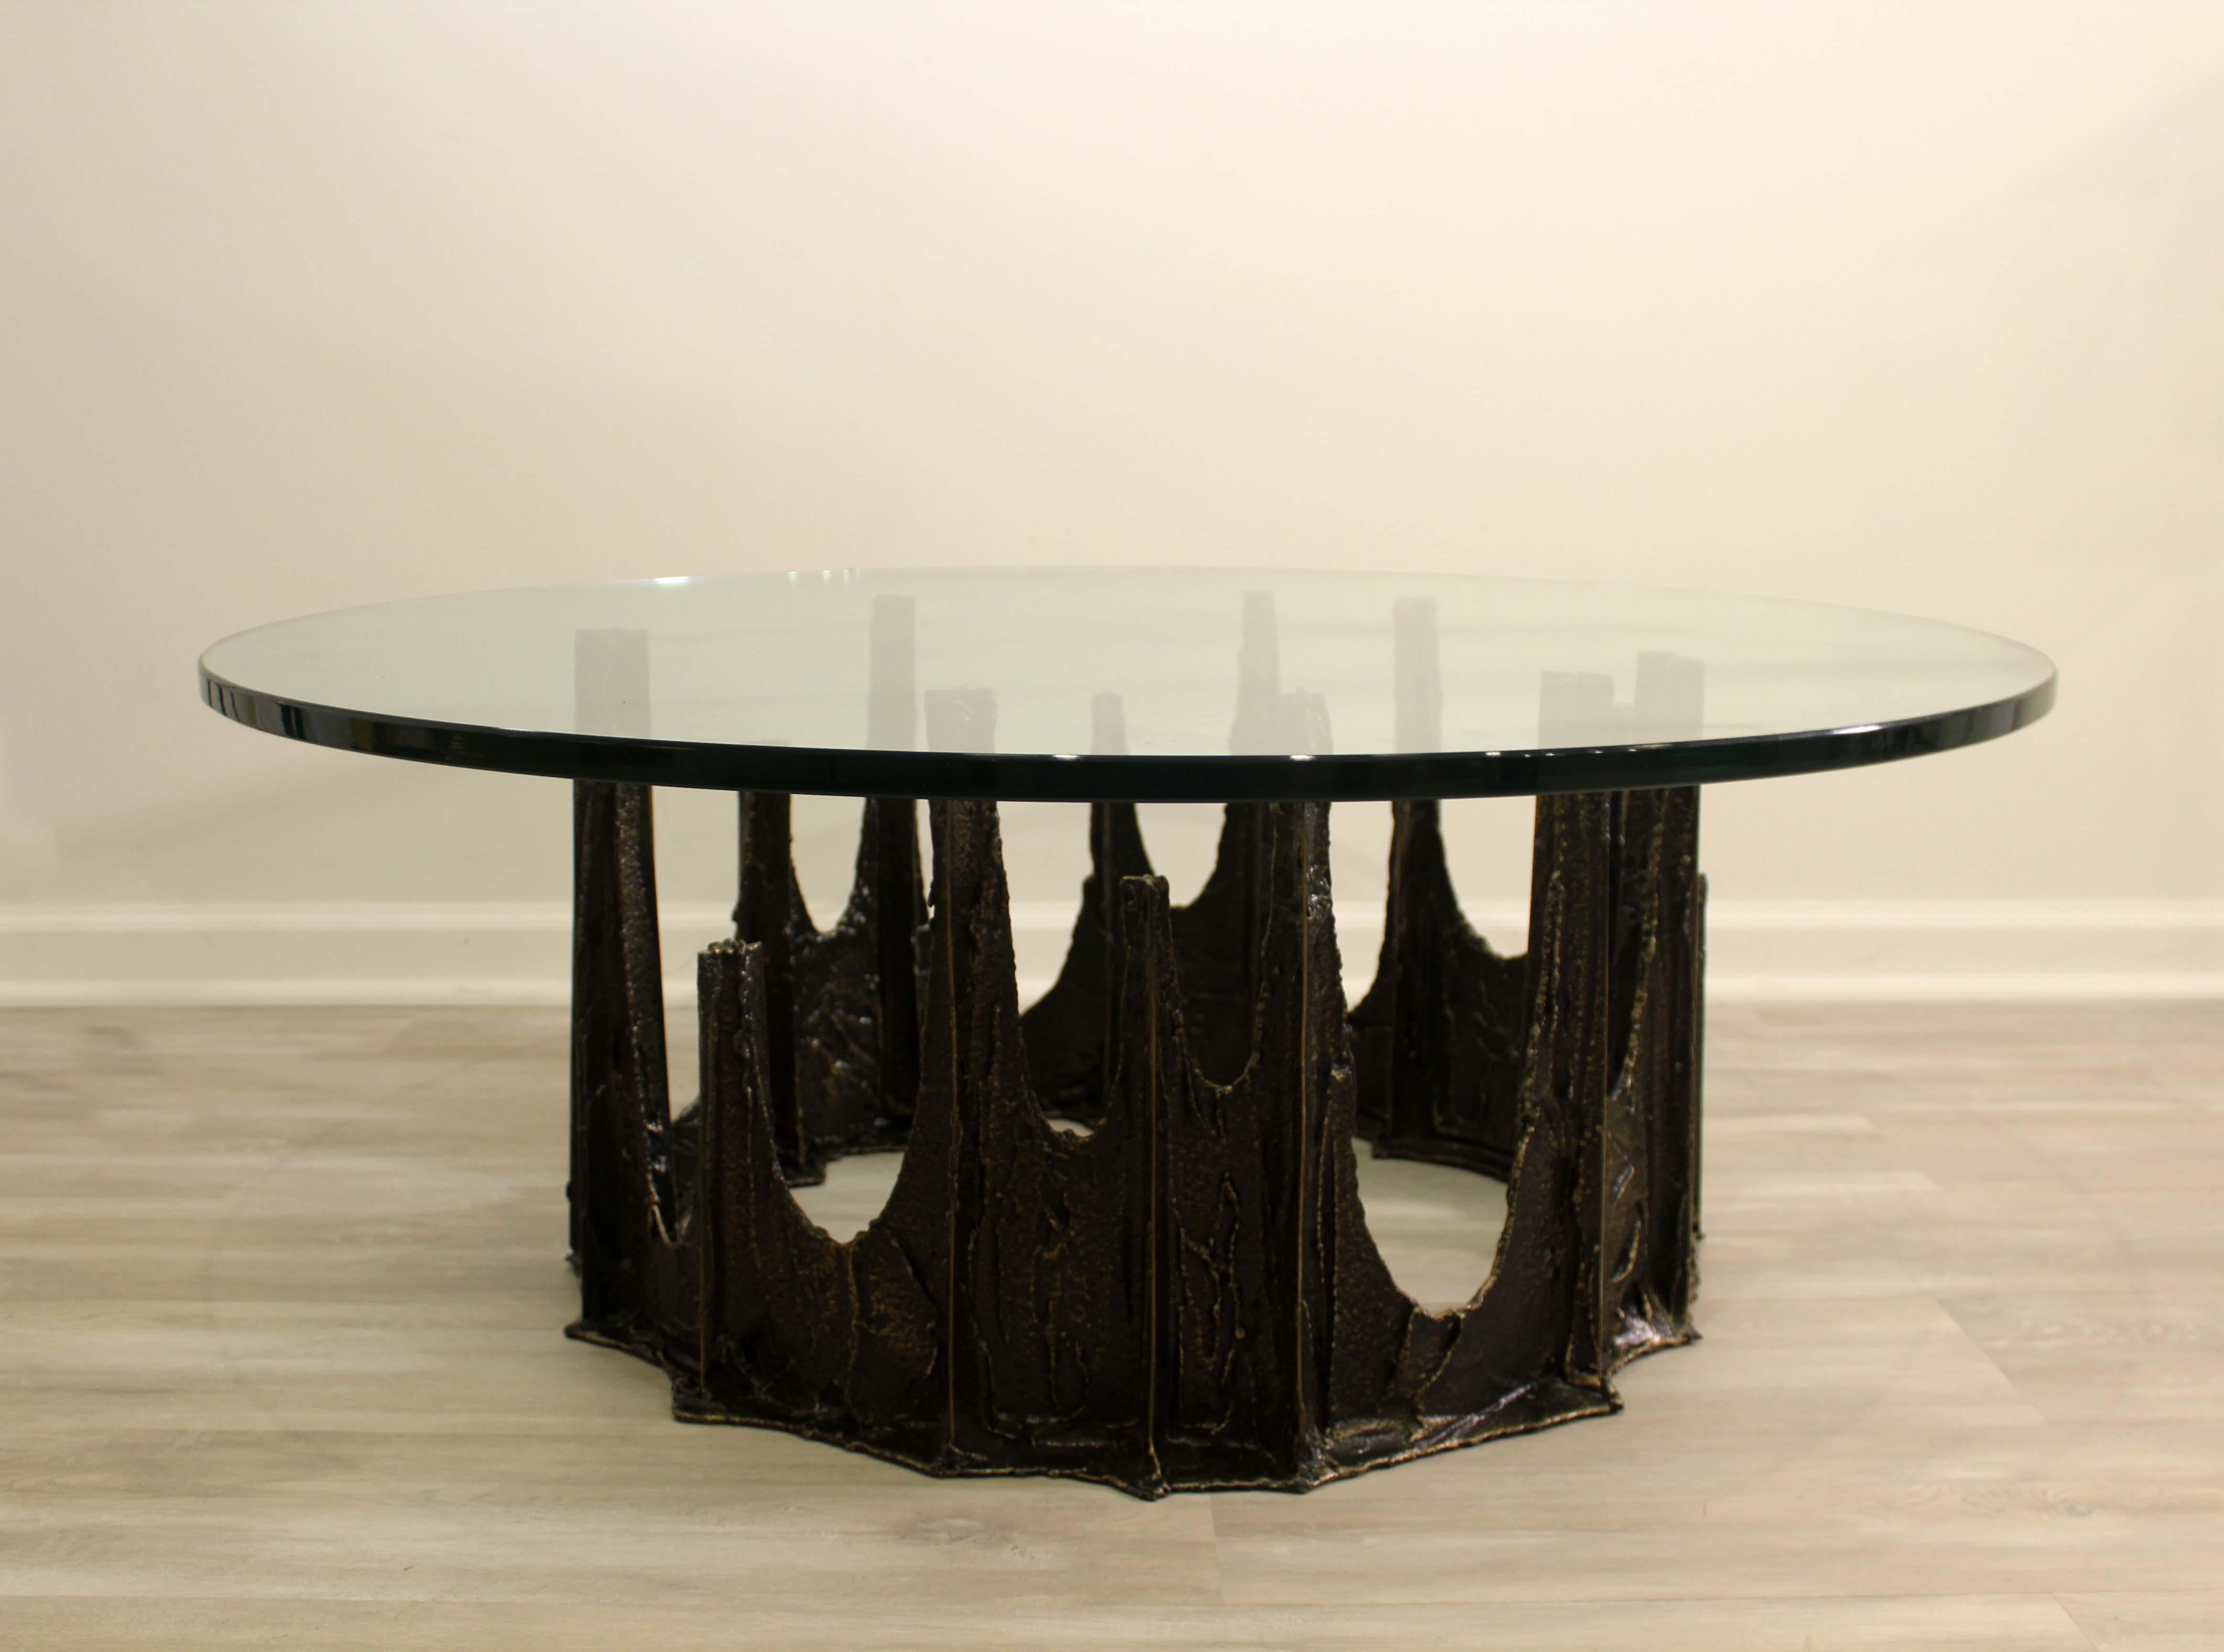 An incredible Paul Evans Brutalist coffee table. Bronze/Brutalist design from the American Craft movement of the 1970s, signed.

Dimensions: 42